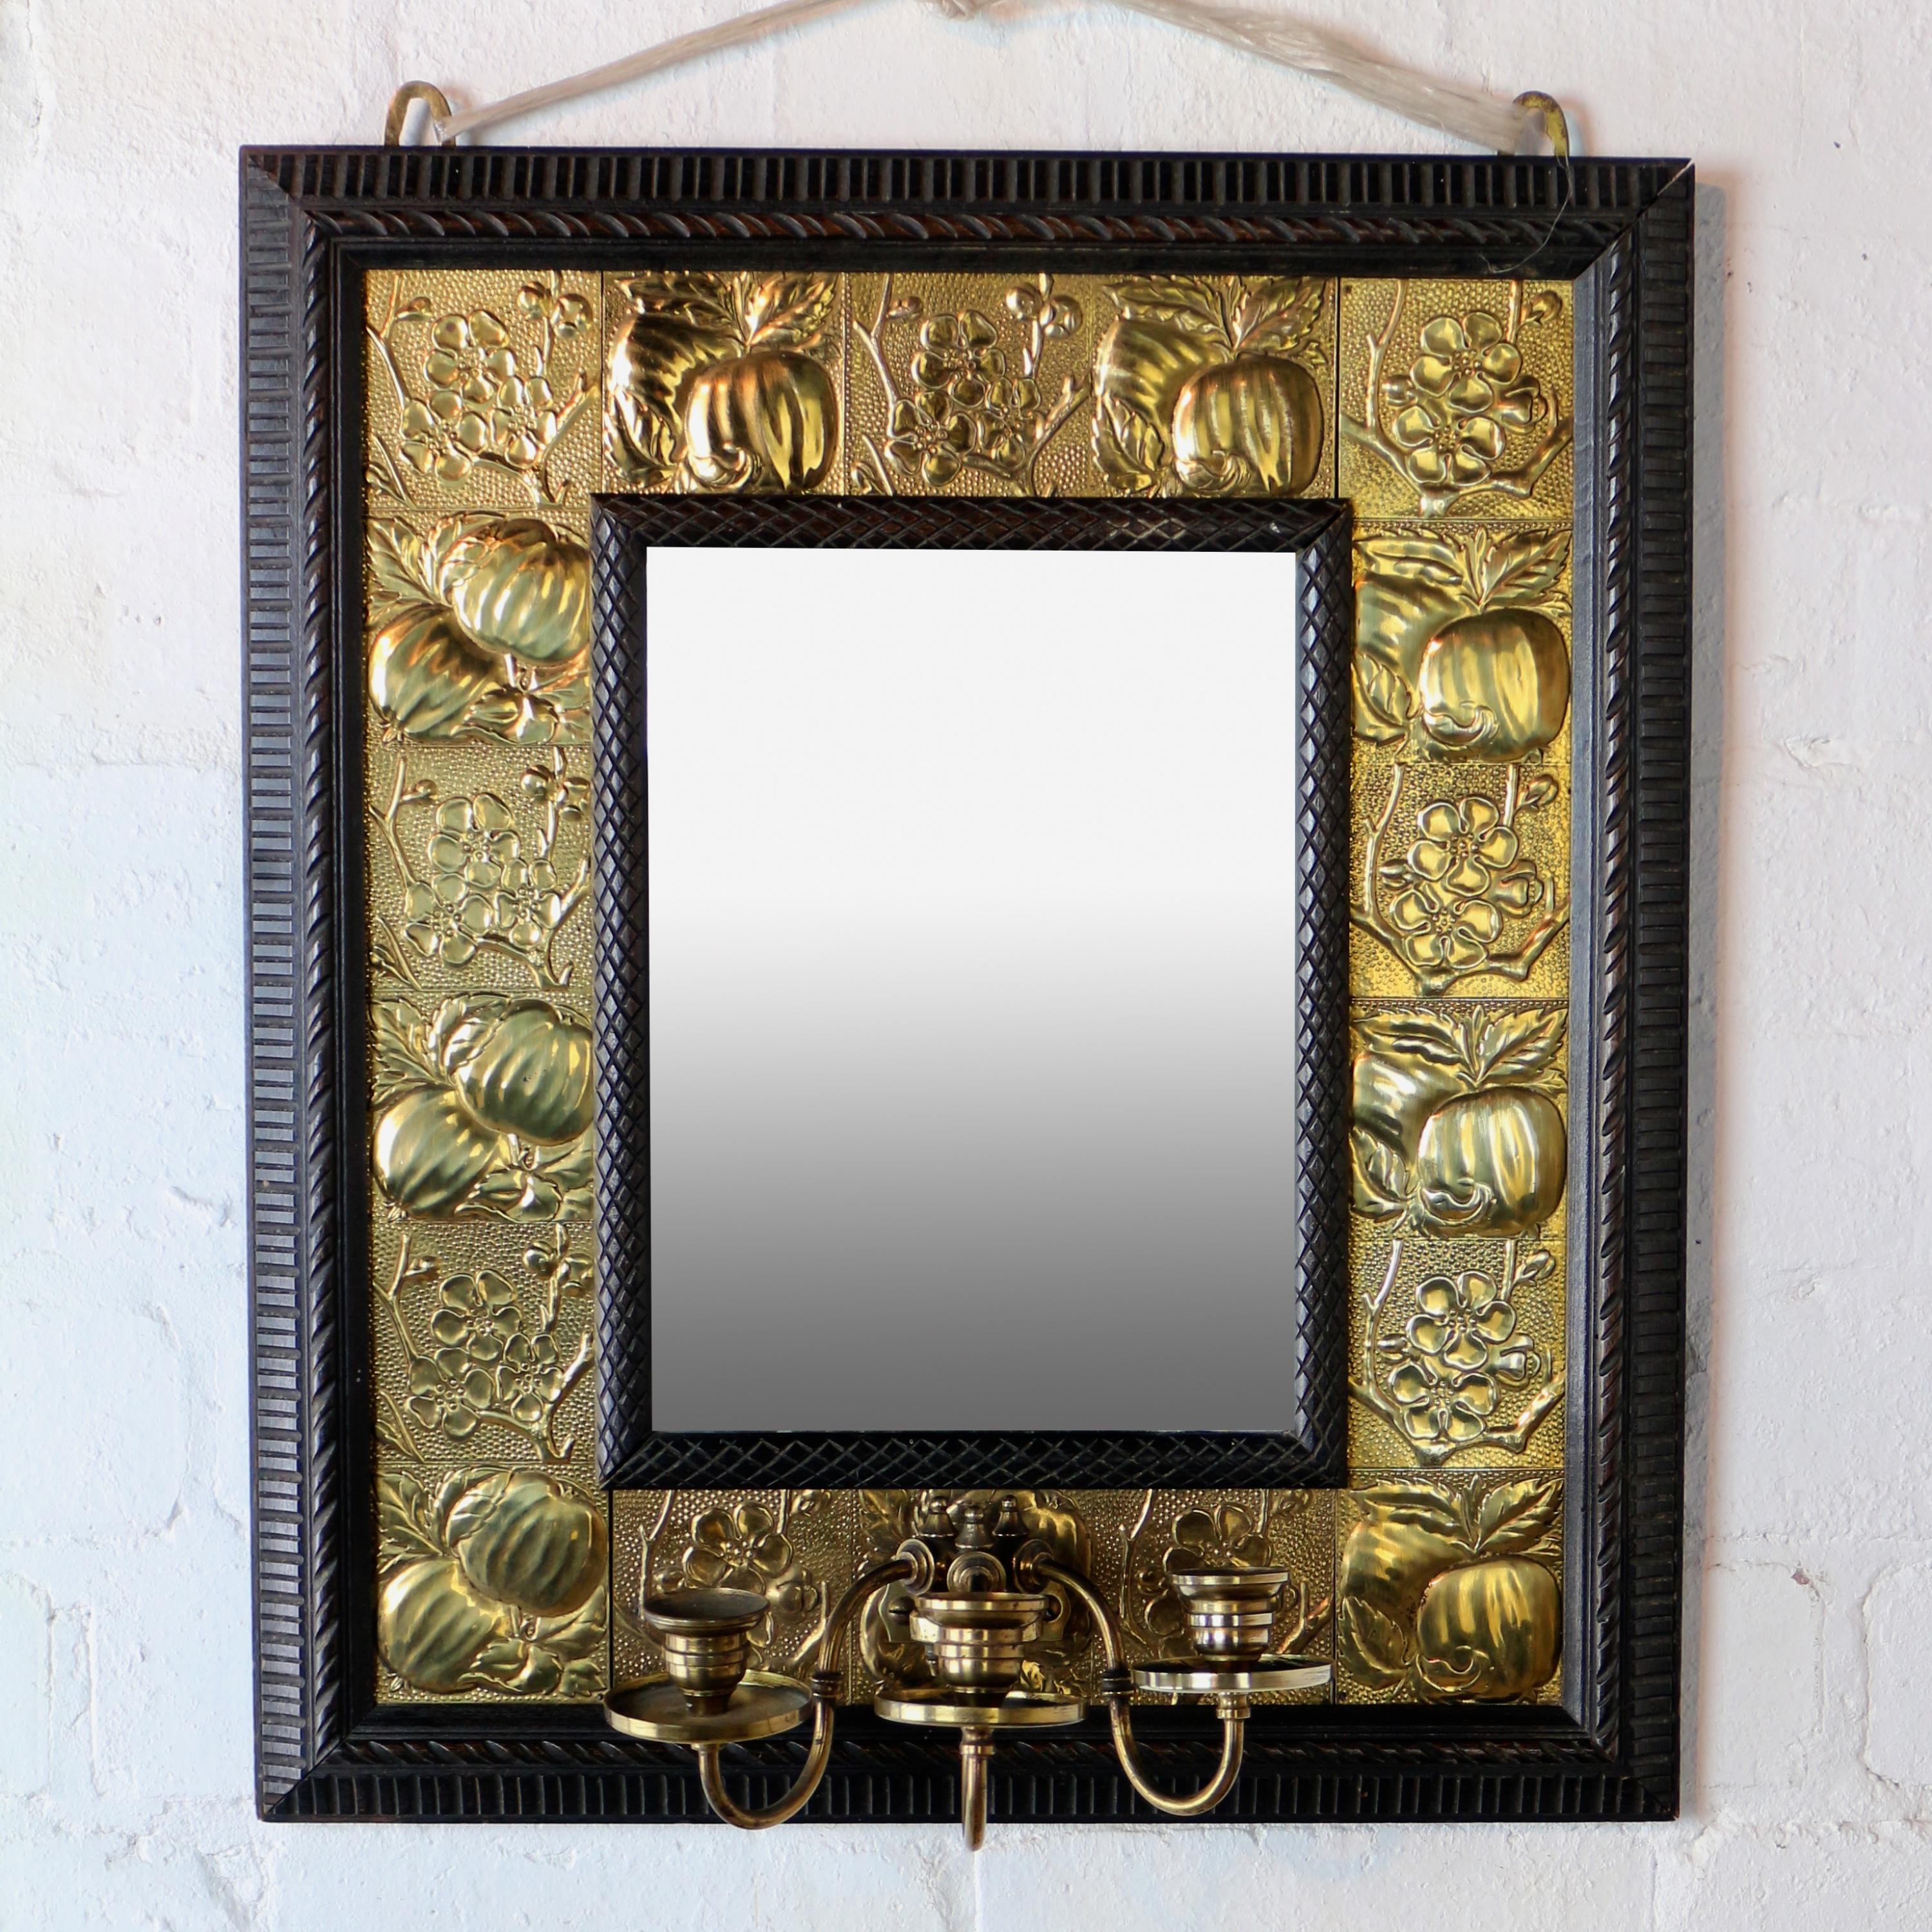 Arts & Crafts Ebonized Mahogany & Brass Mirror, Attributed to Shapland & Petter 1